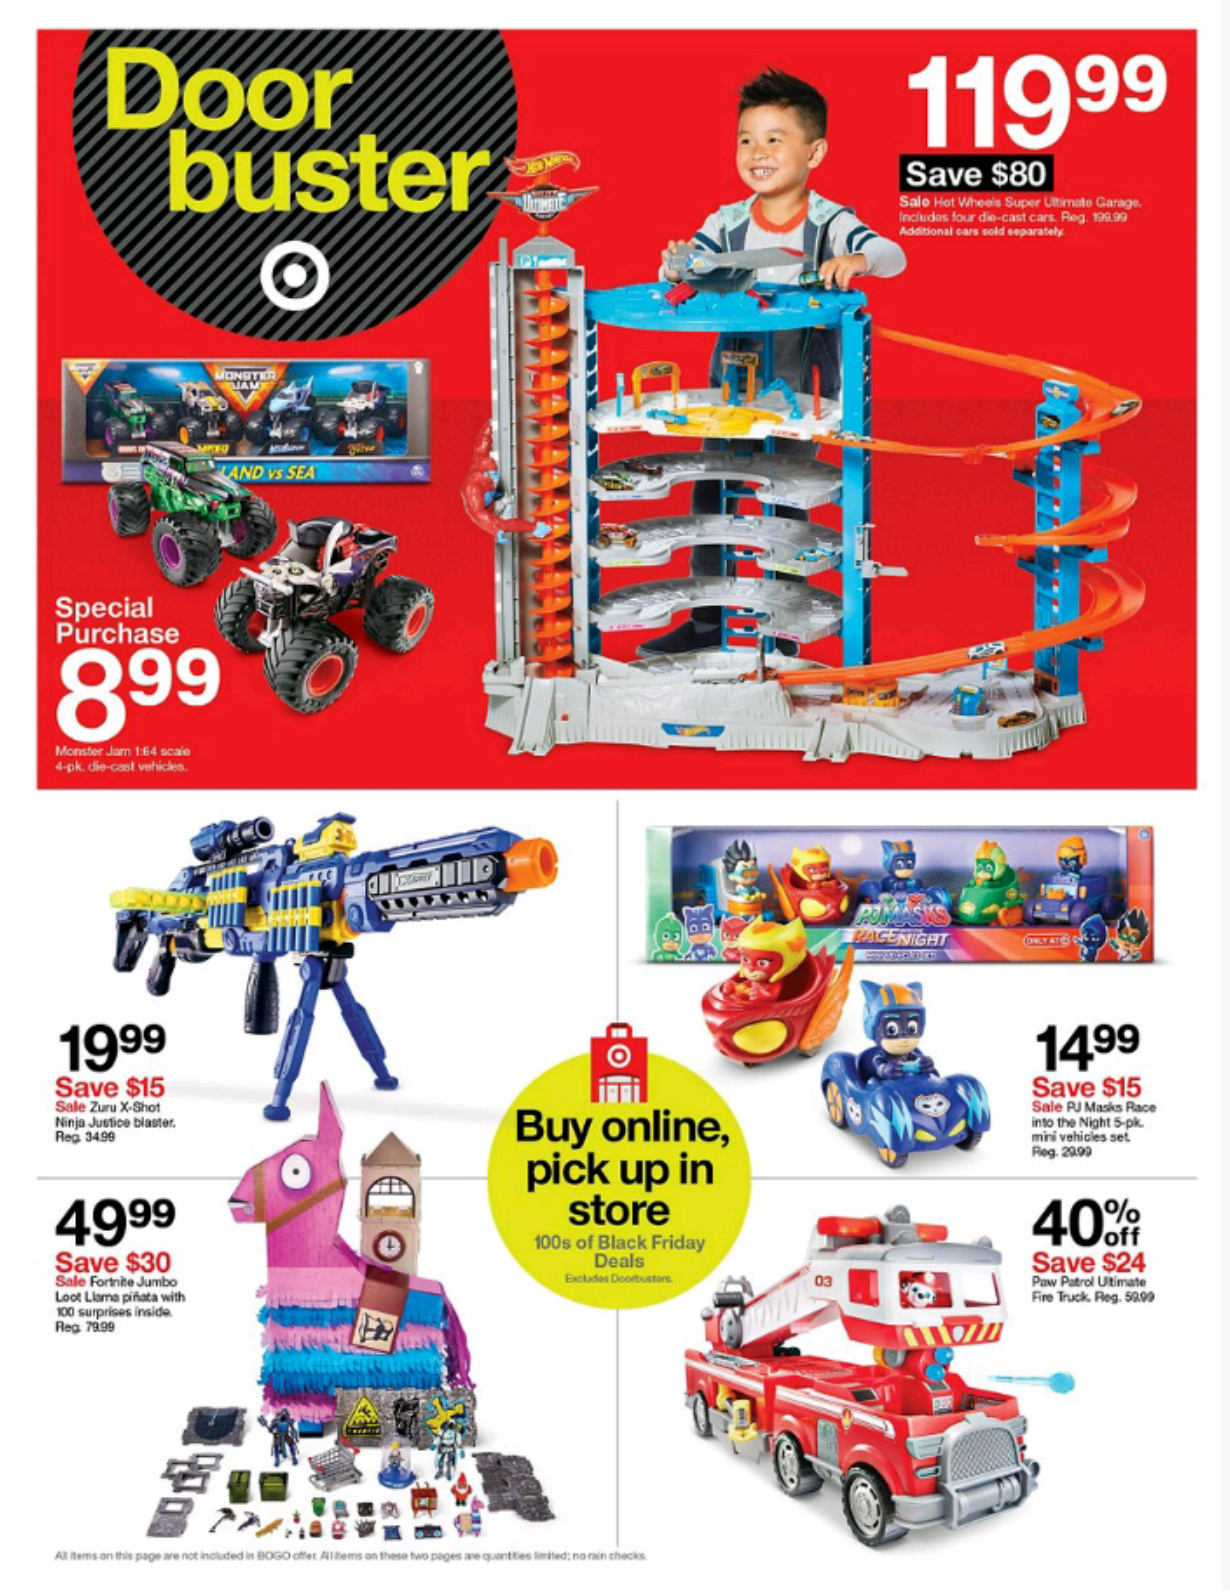 It’s Here! 2019 Target Black Friday Ad Preview - Page 6 of 13 - 0